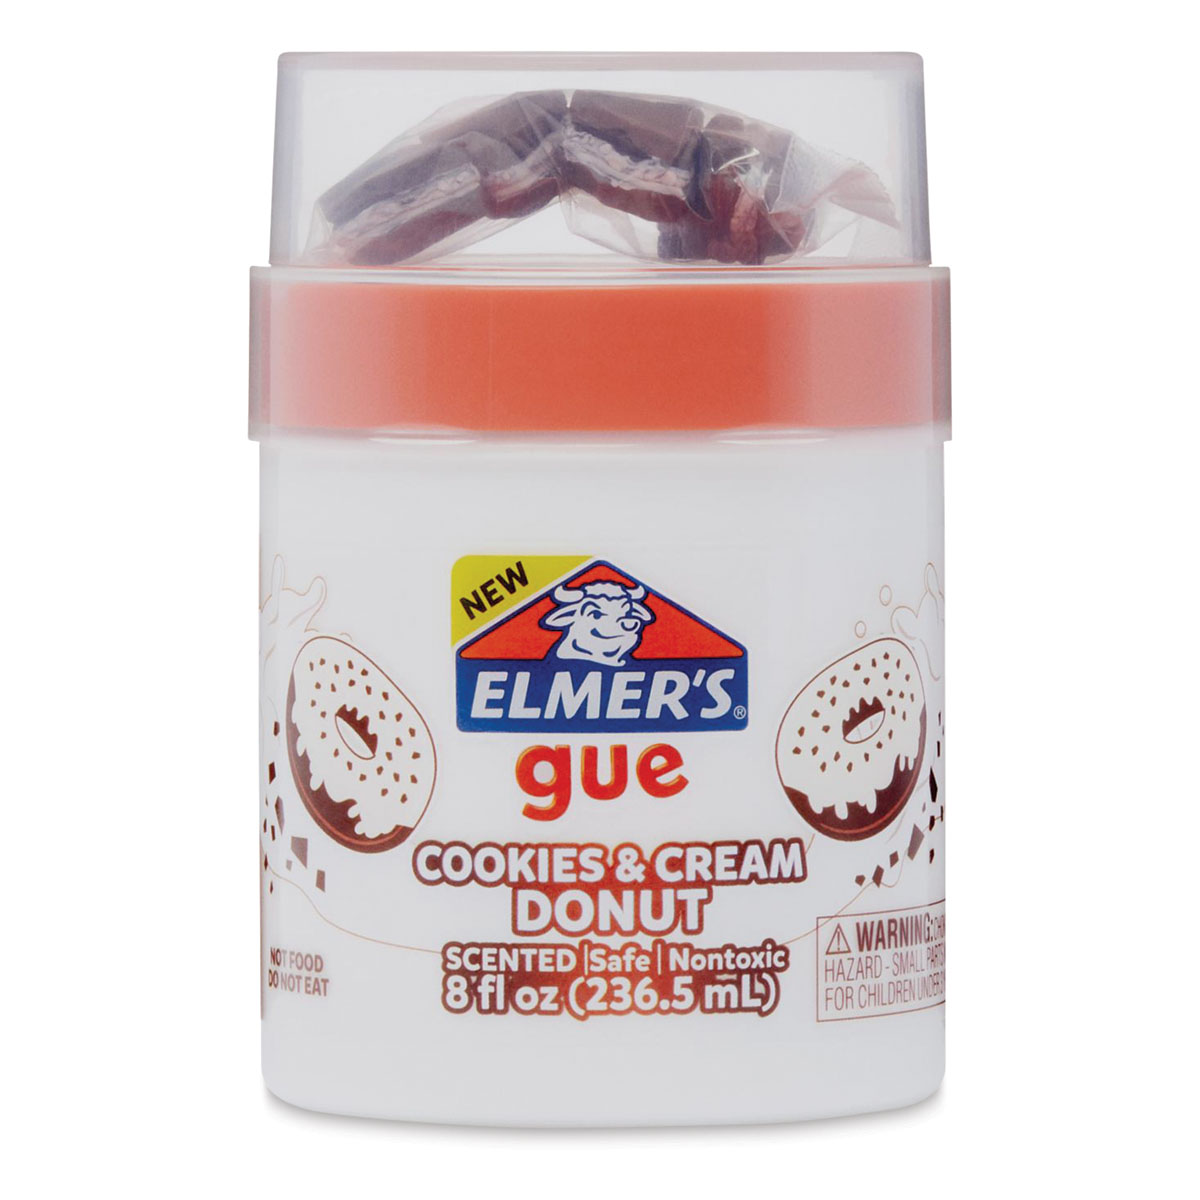 Elmer's GUE Premade, Donut Shop Variety Pack, Scented, Includes Fluffy,  Glossy Blue, Slime Add-Ins, 2 Count